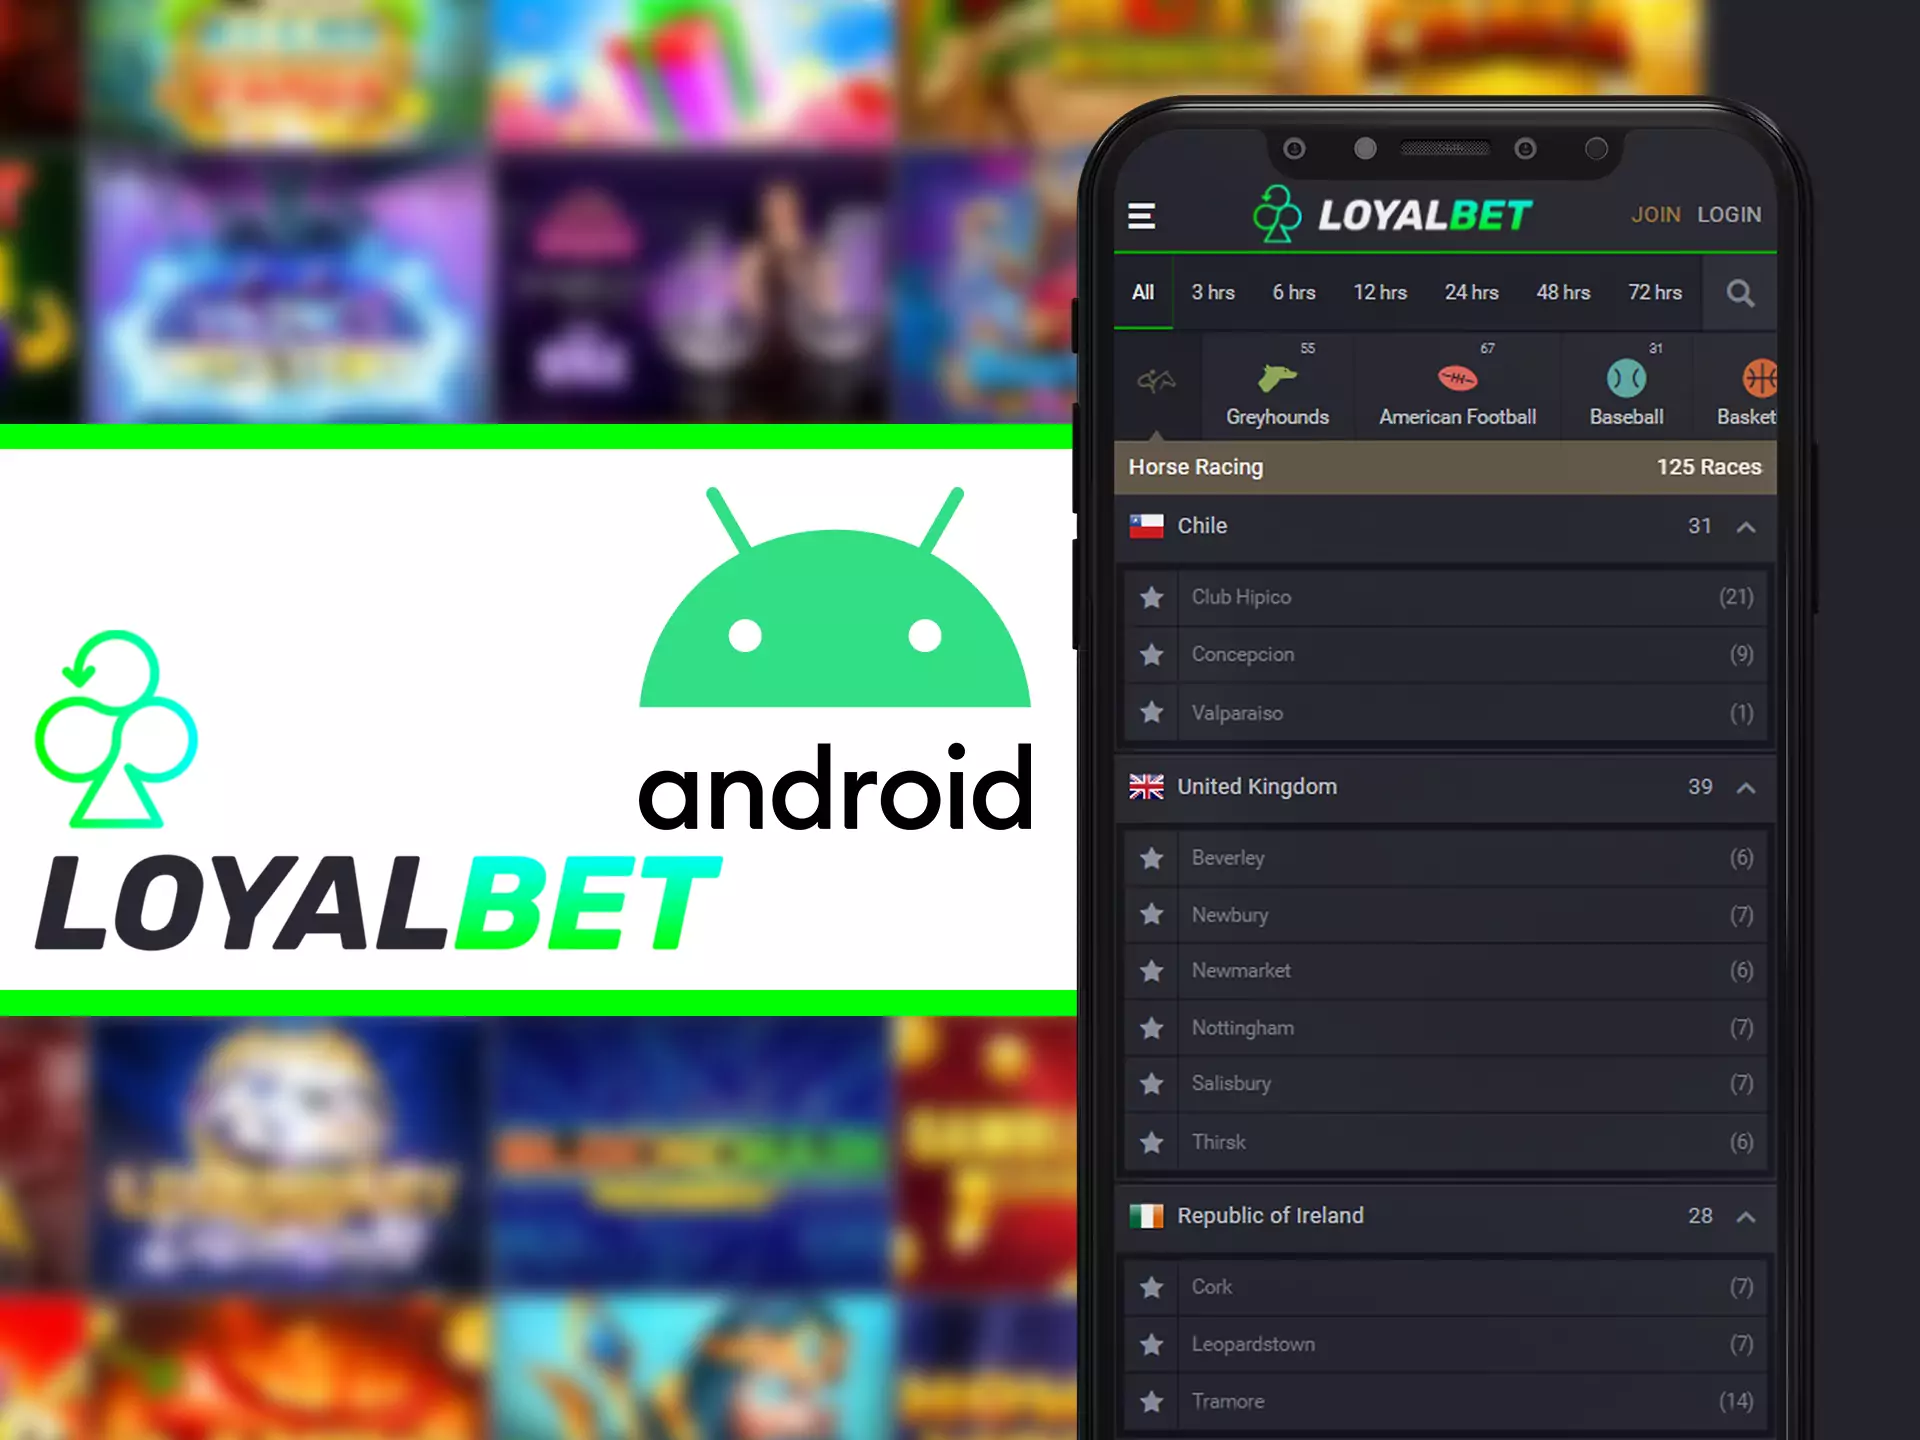 Install Loyalbet app on your android device.